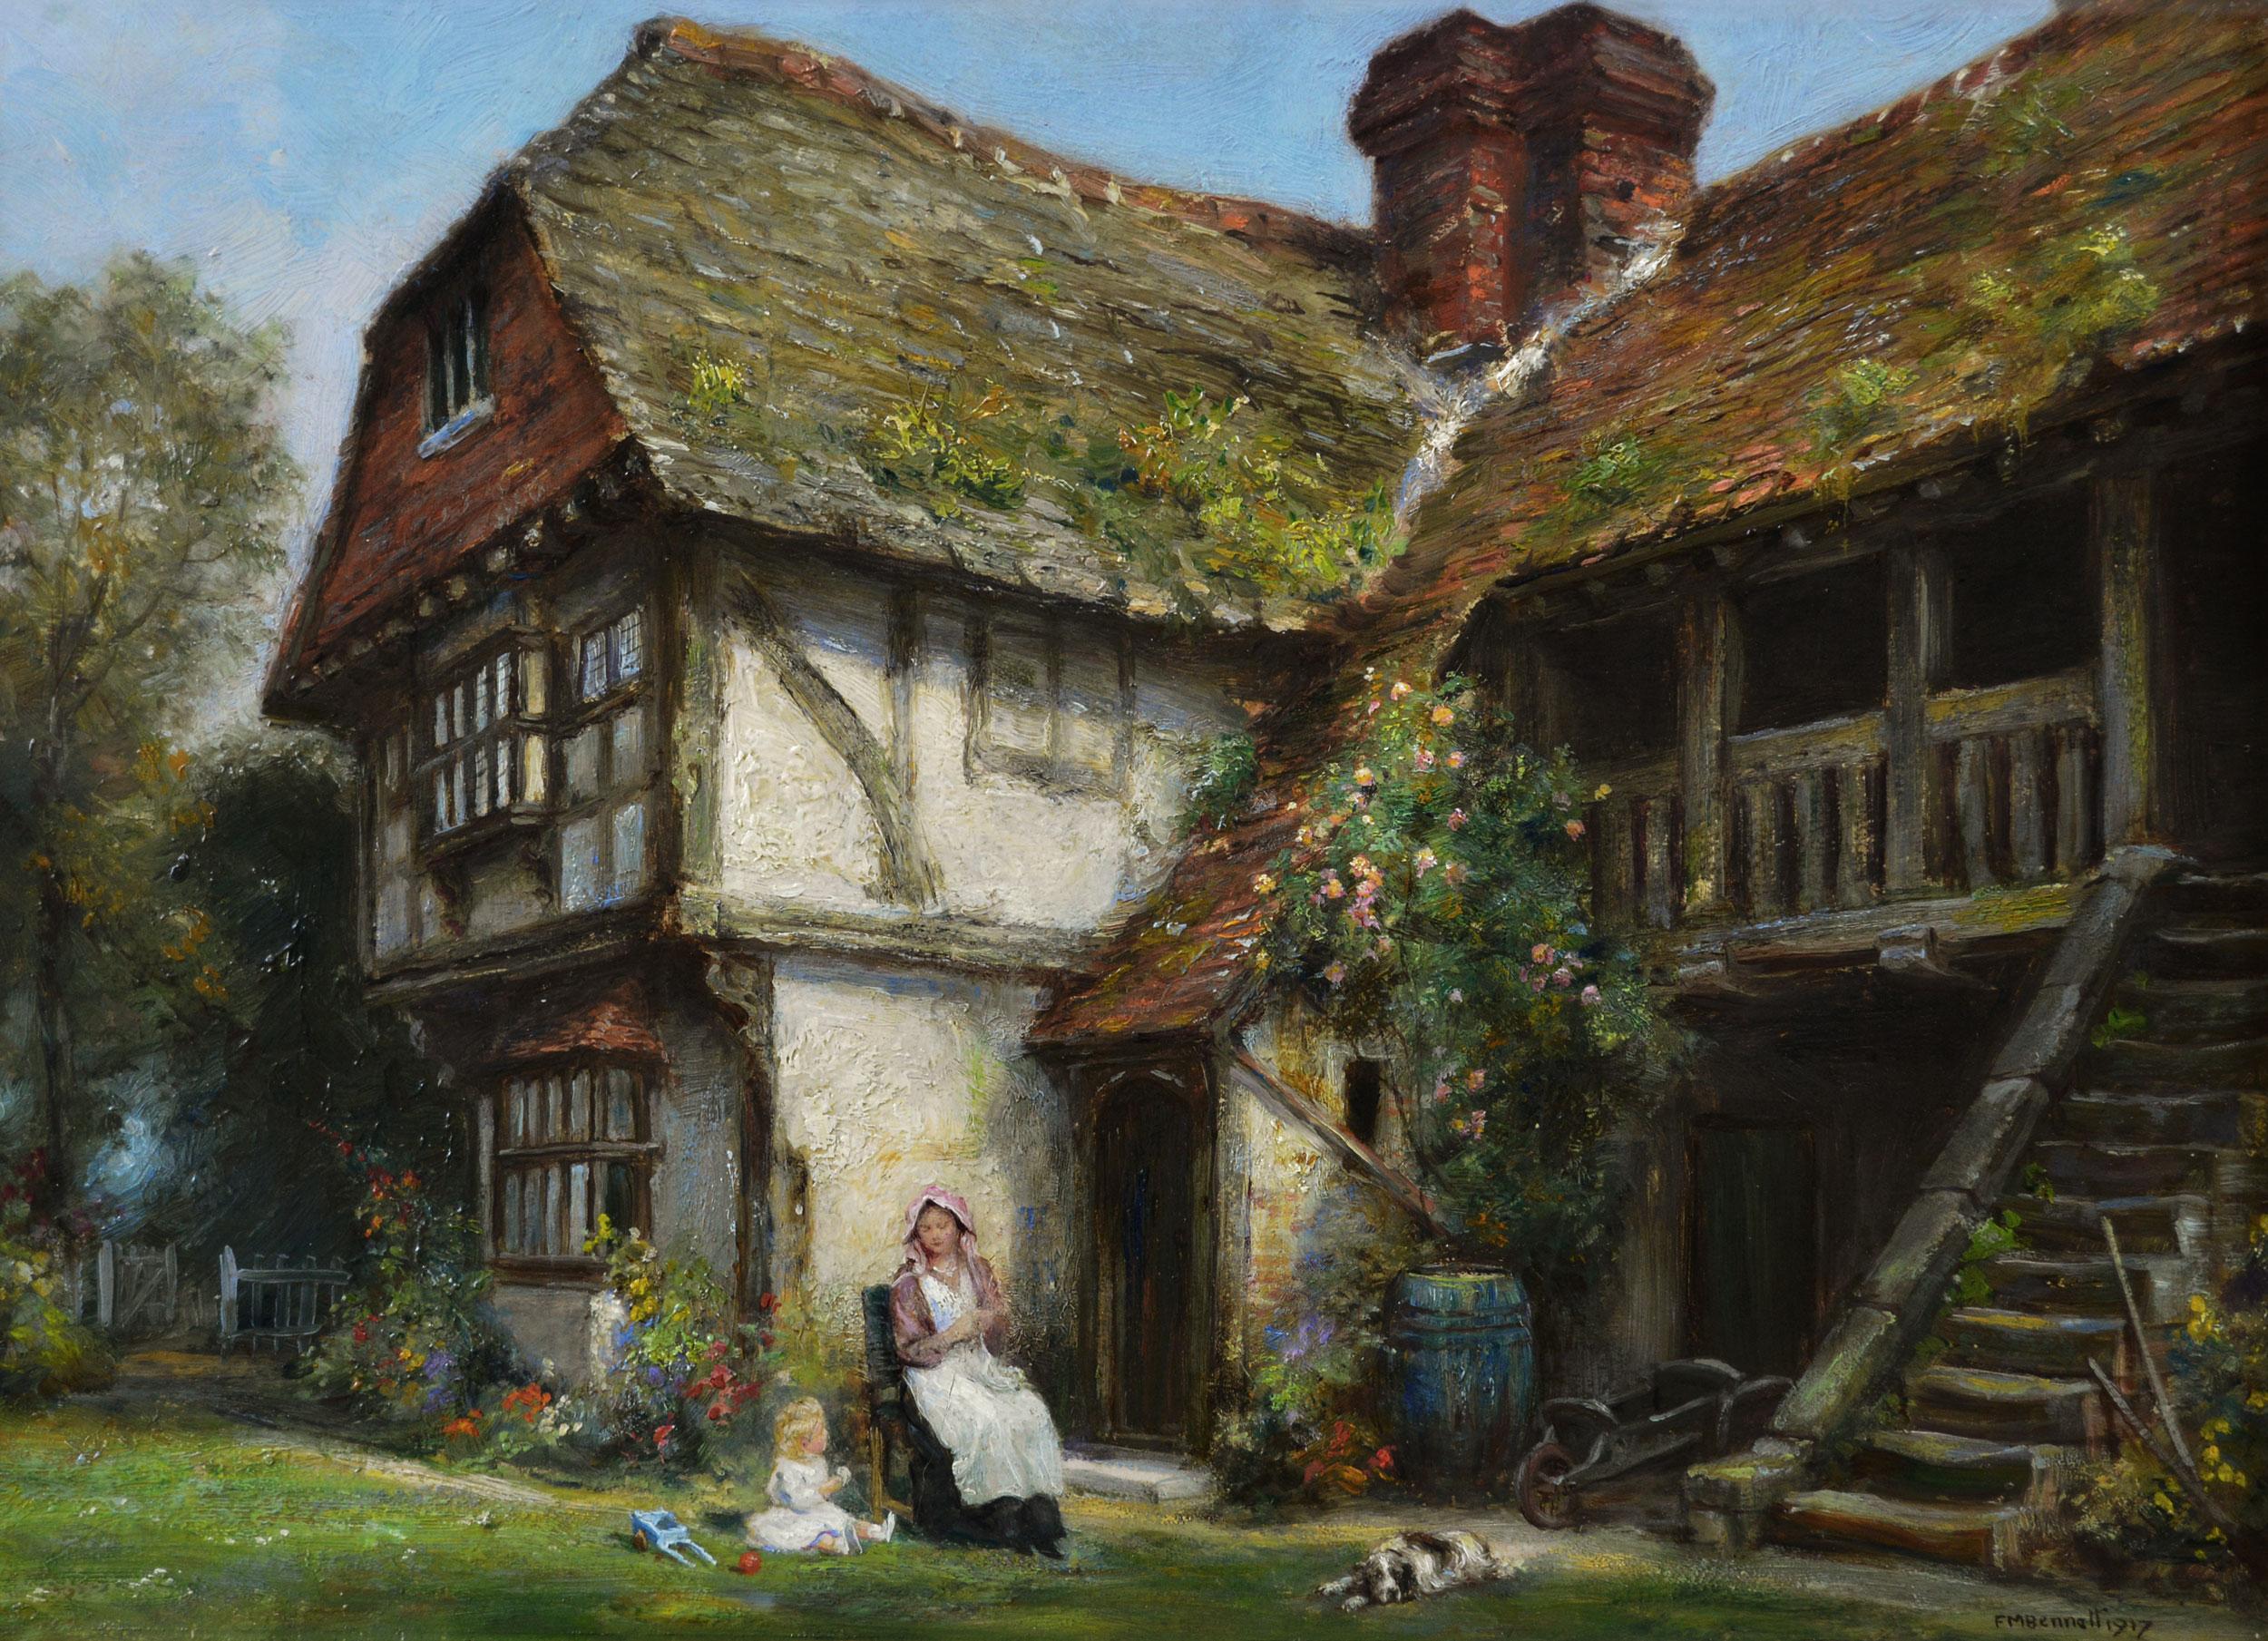 Genre oil painting of a woman & child in a garden - Painting by Frank Moss Bennett